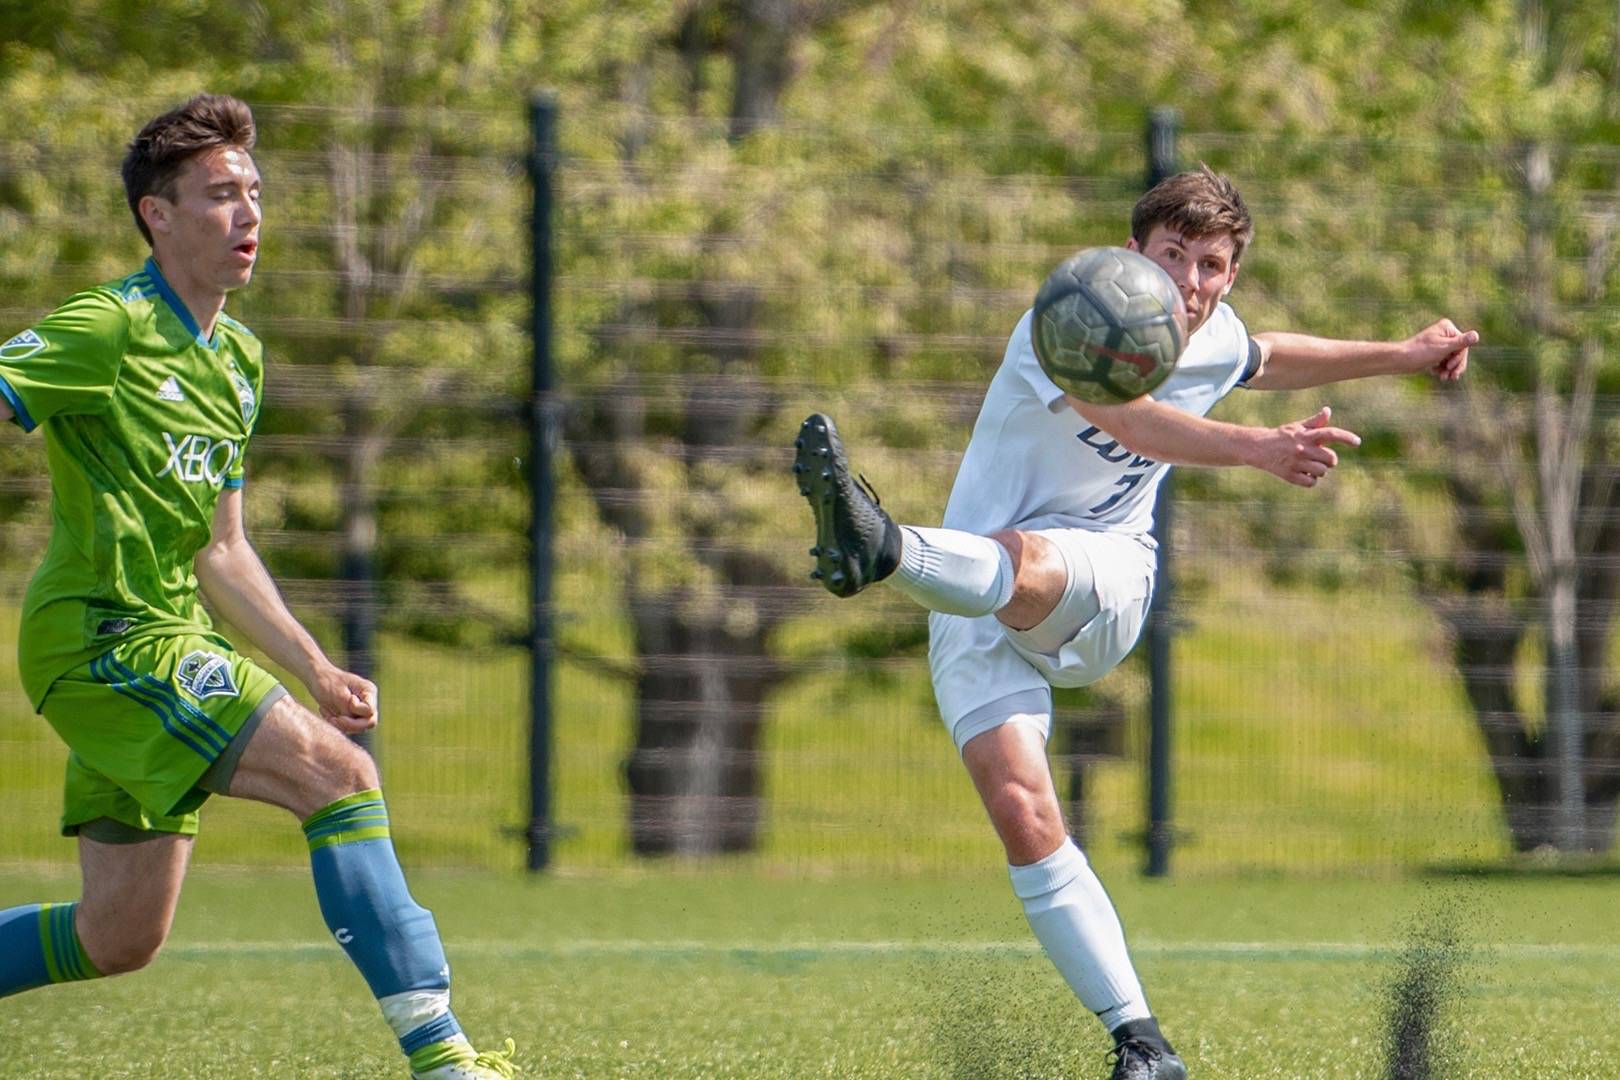 Christian Rotter has a goal and eight assists in 15 starts for the Vikings this season. COURTESY PHOTO, WWU Athletics